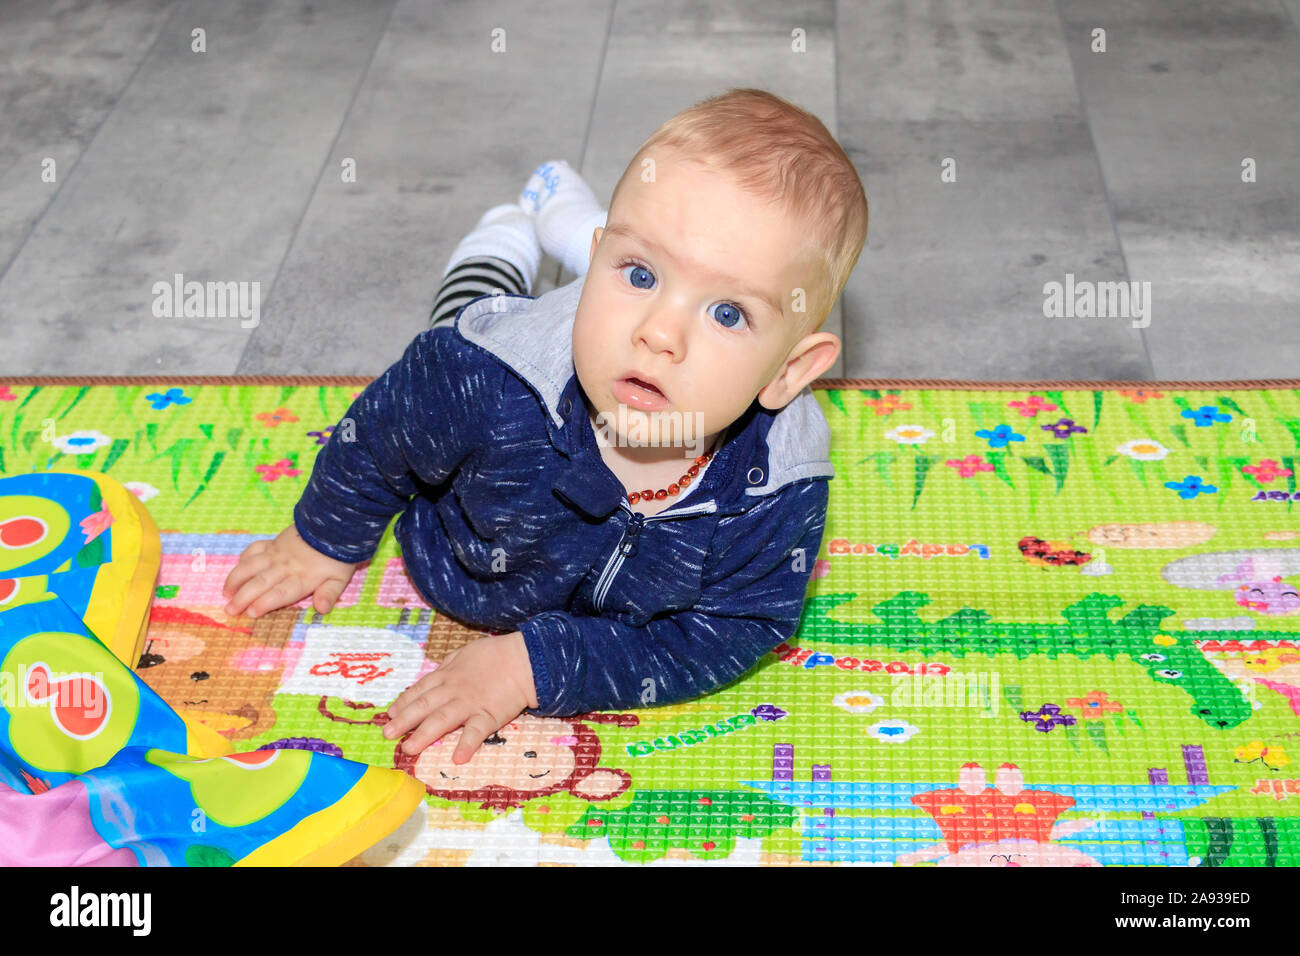 Closeup Of Happy Nine Months Baby Boy Crawling On Colorful Playmat A Nine Month Old Boy With Blond Hair And Blue Eyes Stock Photo Alamy